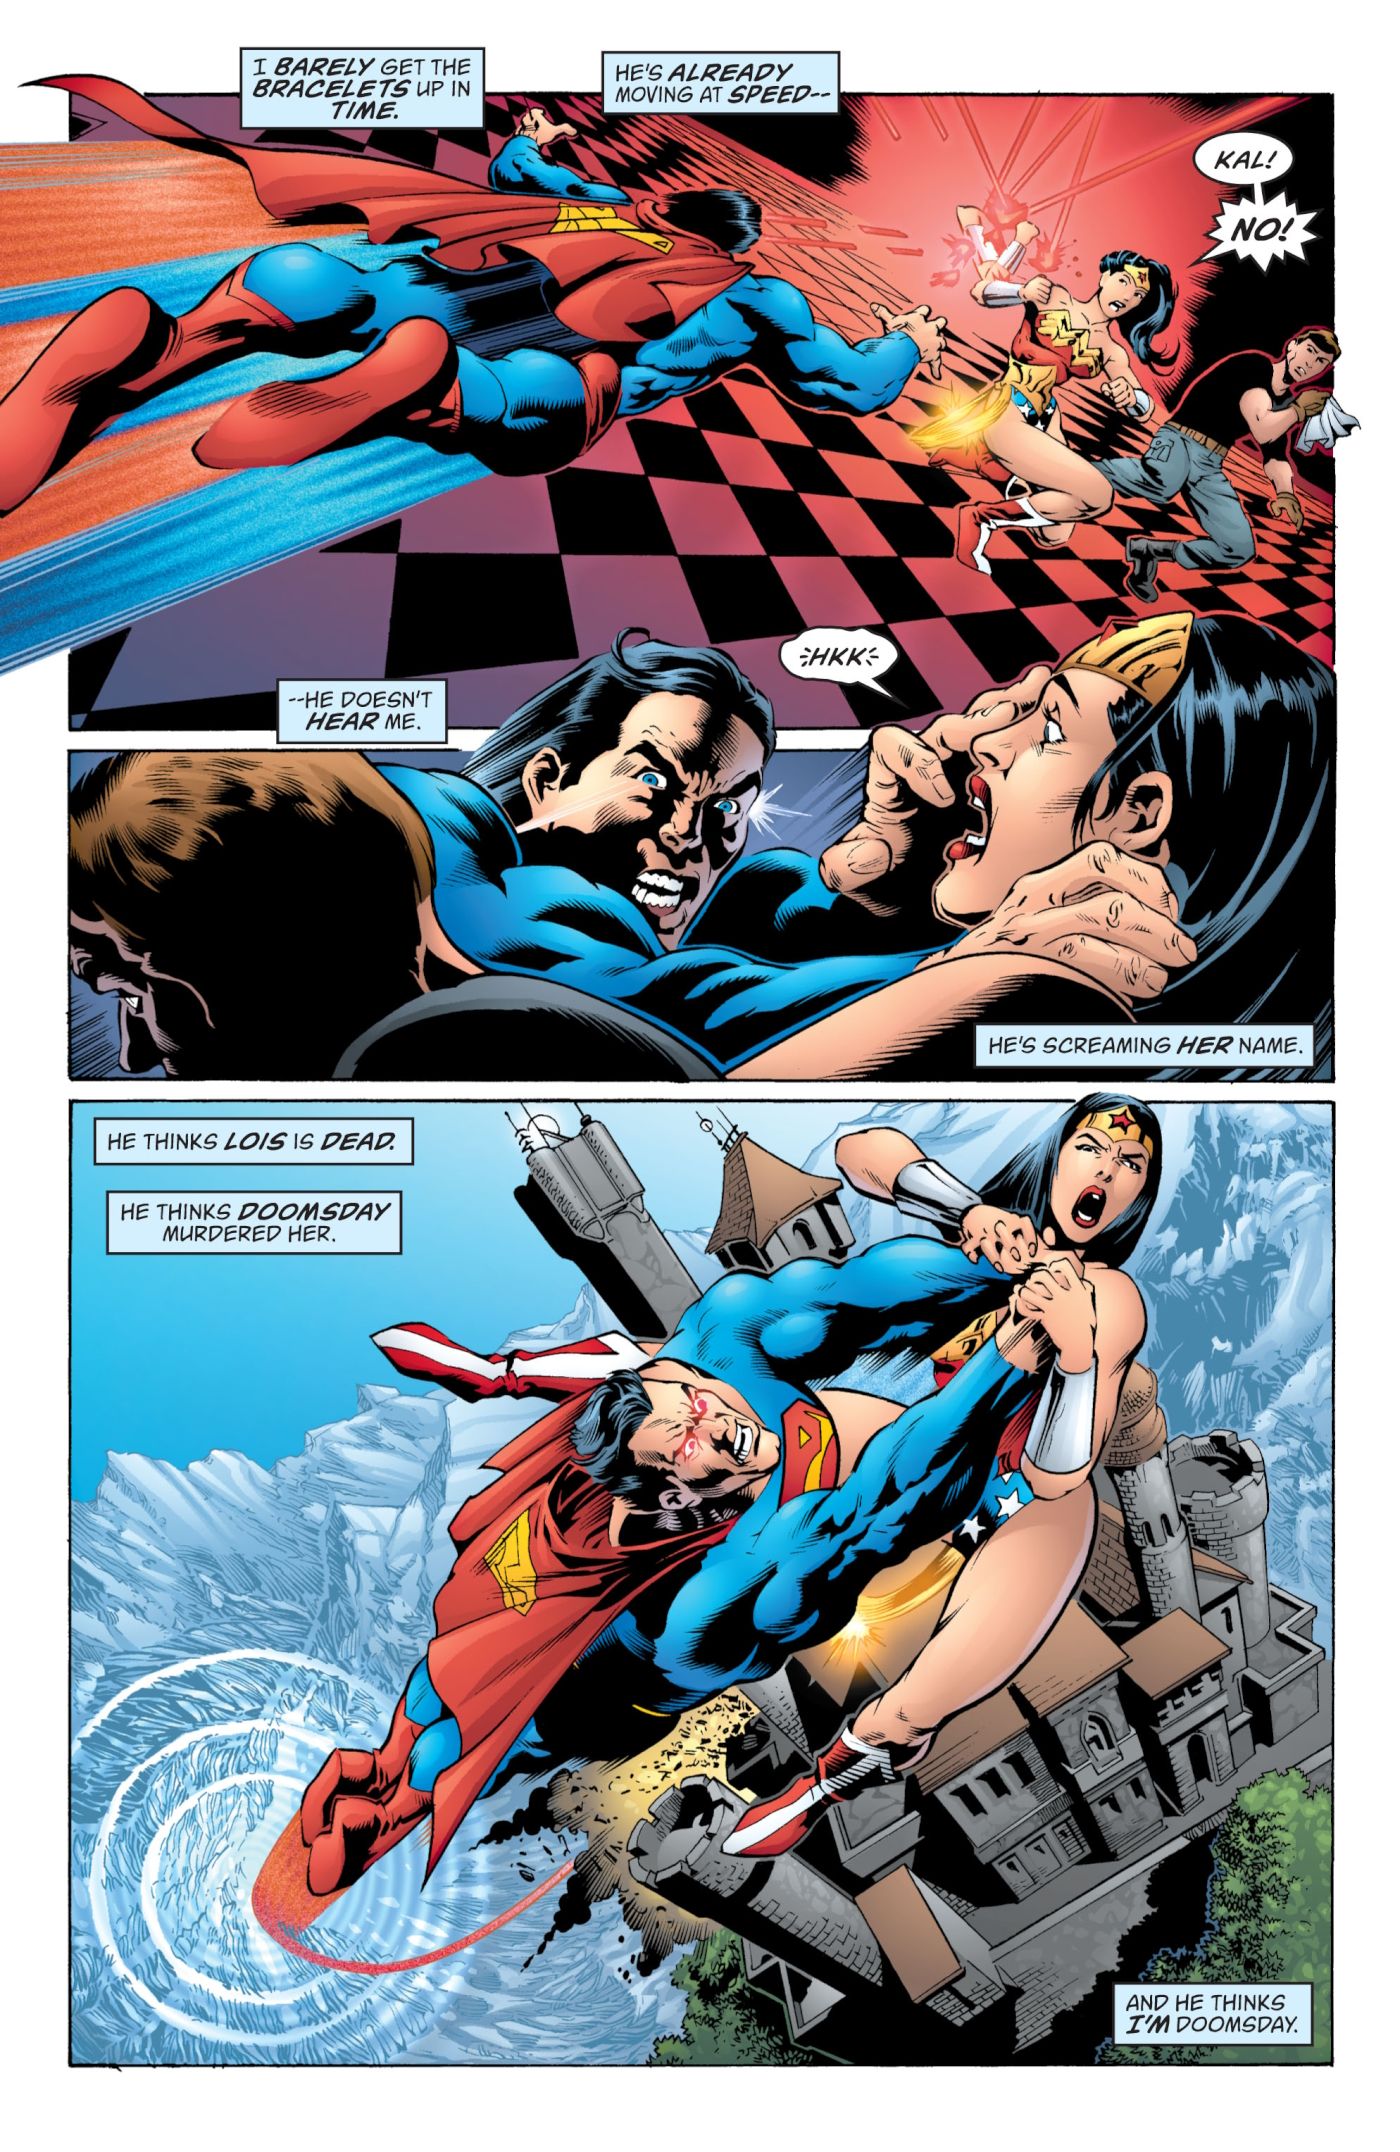 Maxwell Lord uses mind control to make Superman attack Wonder Woman